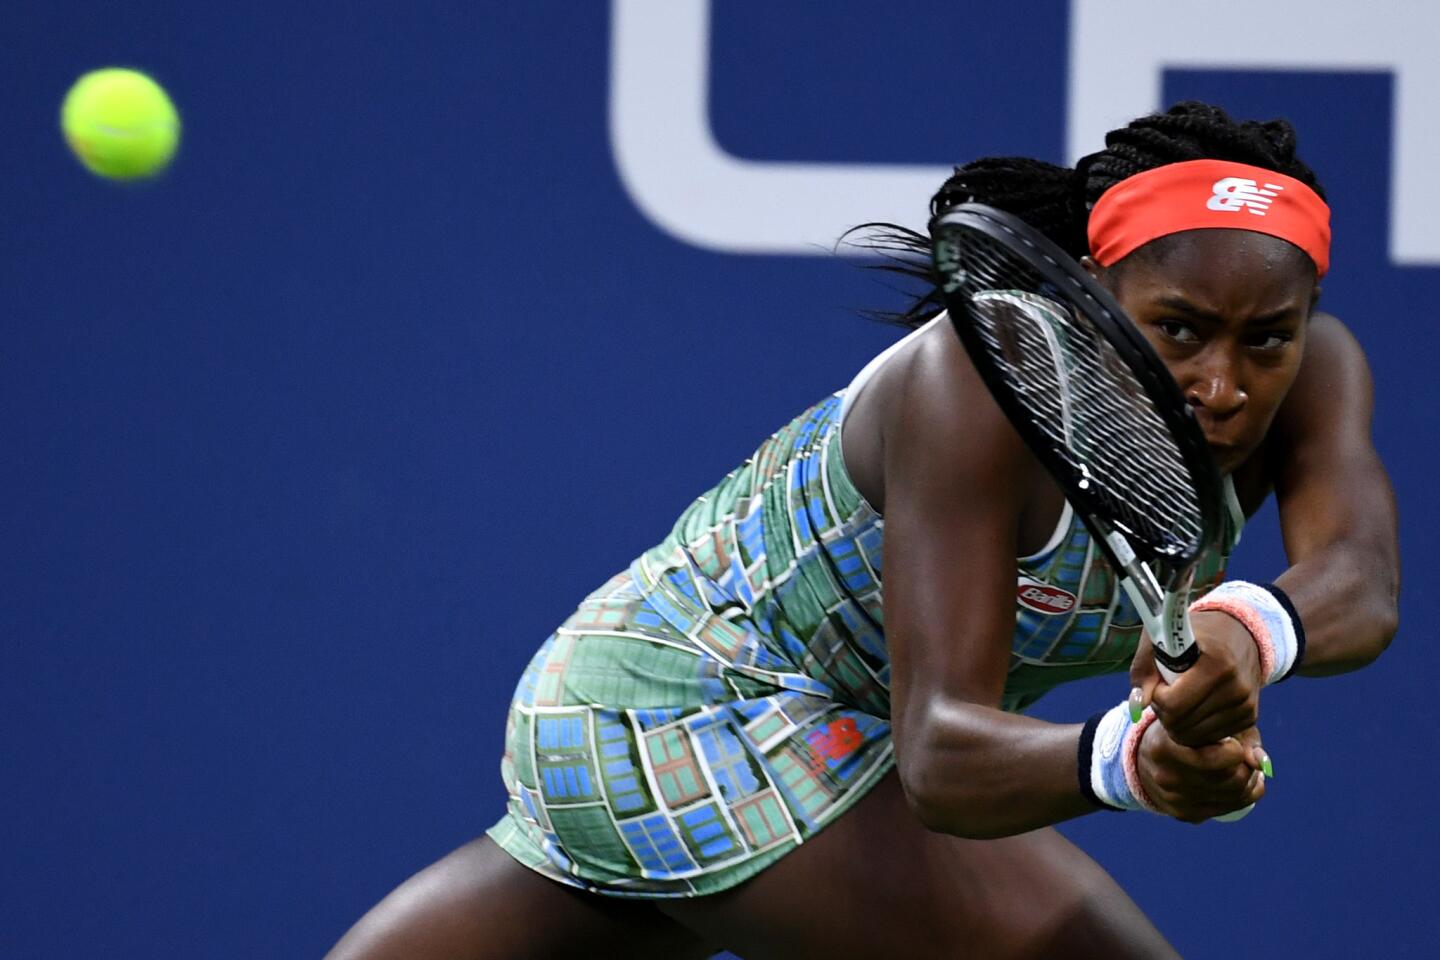 Coco Gauff returns a shot during her Women's Singles second round match against Timea Babos on Day 4 of the 2019 U.S. Open at the USTA Billie Jean King National Tennis Center on Aug.29, 2019, in Queens.